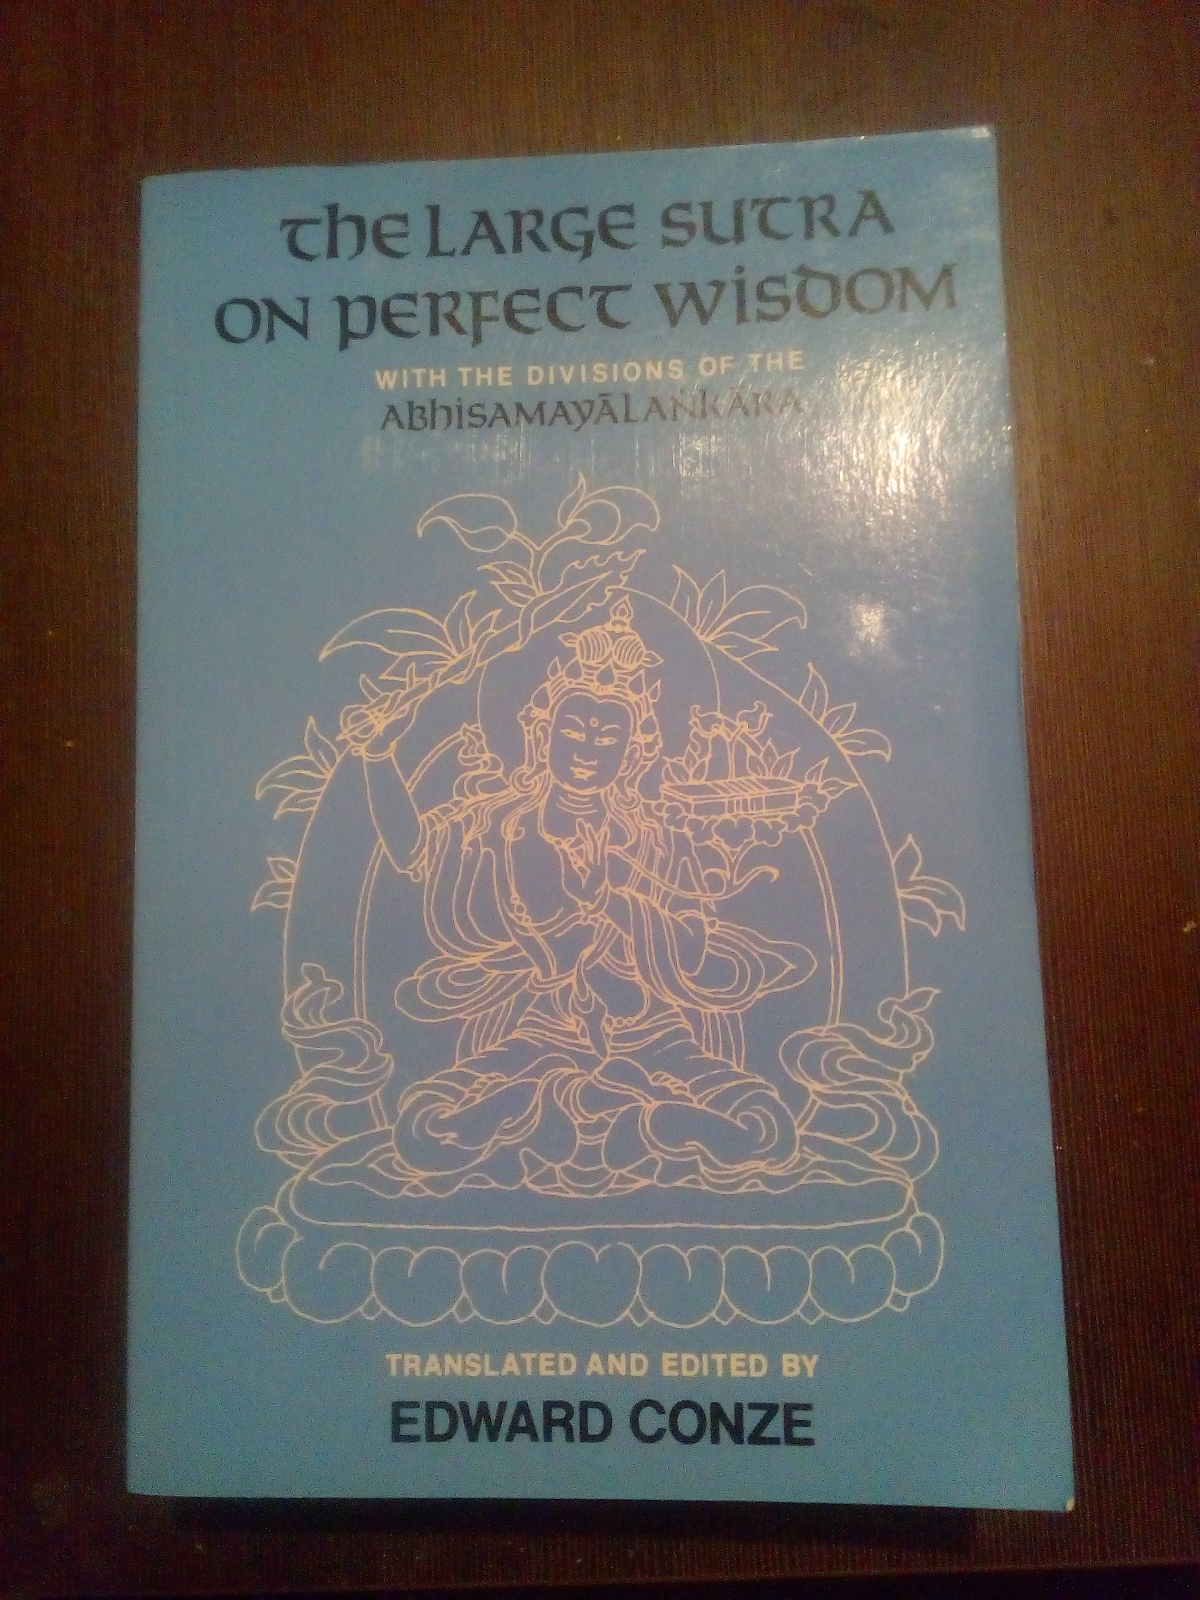 The Large Sutra on Perfect Wisdom.